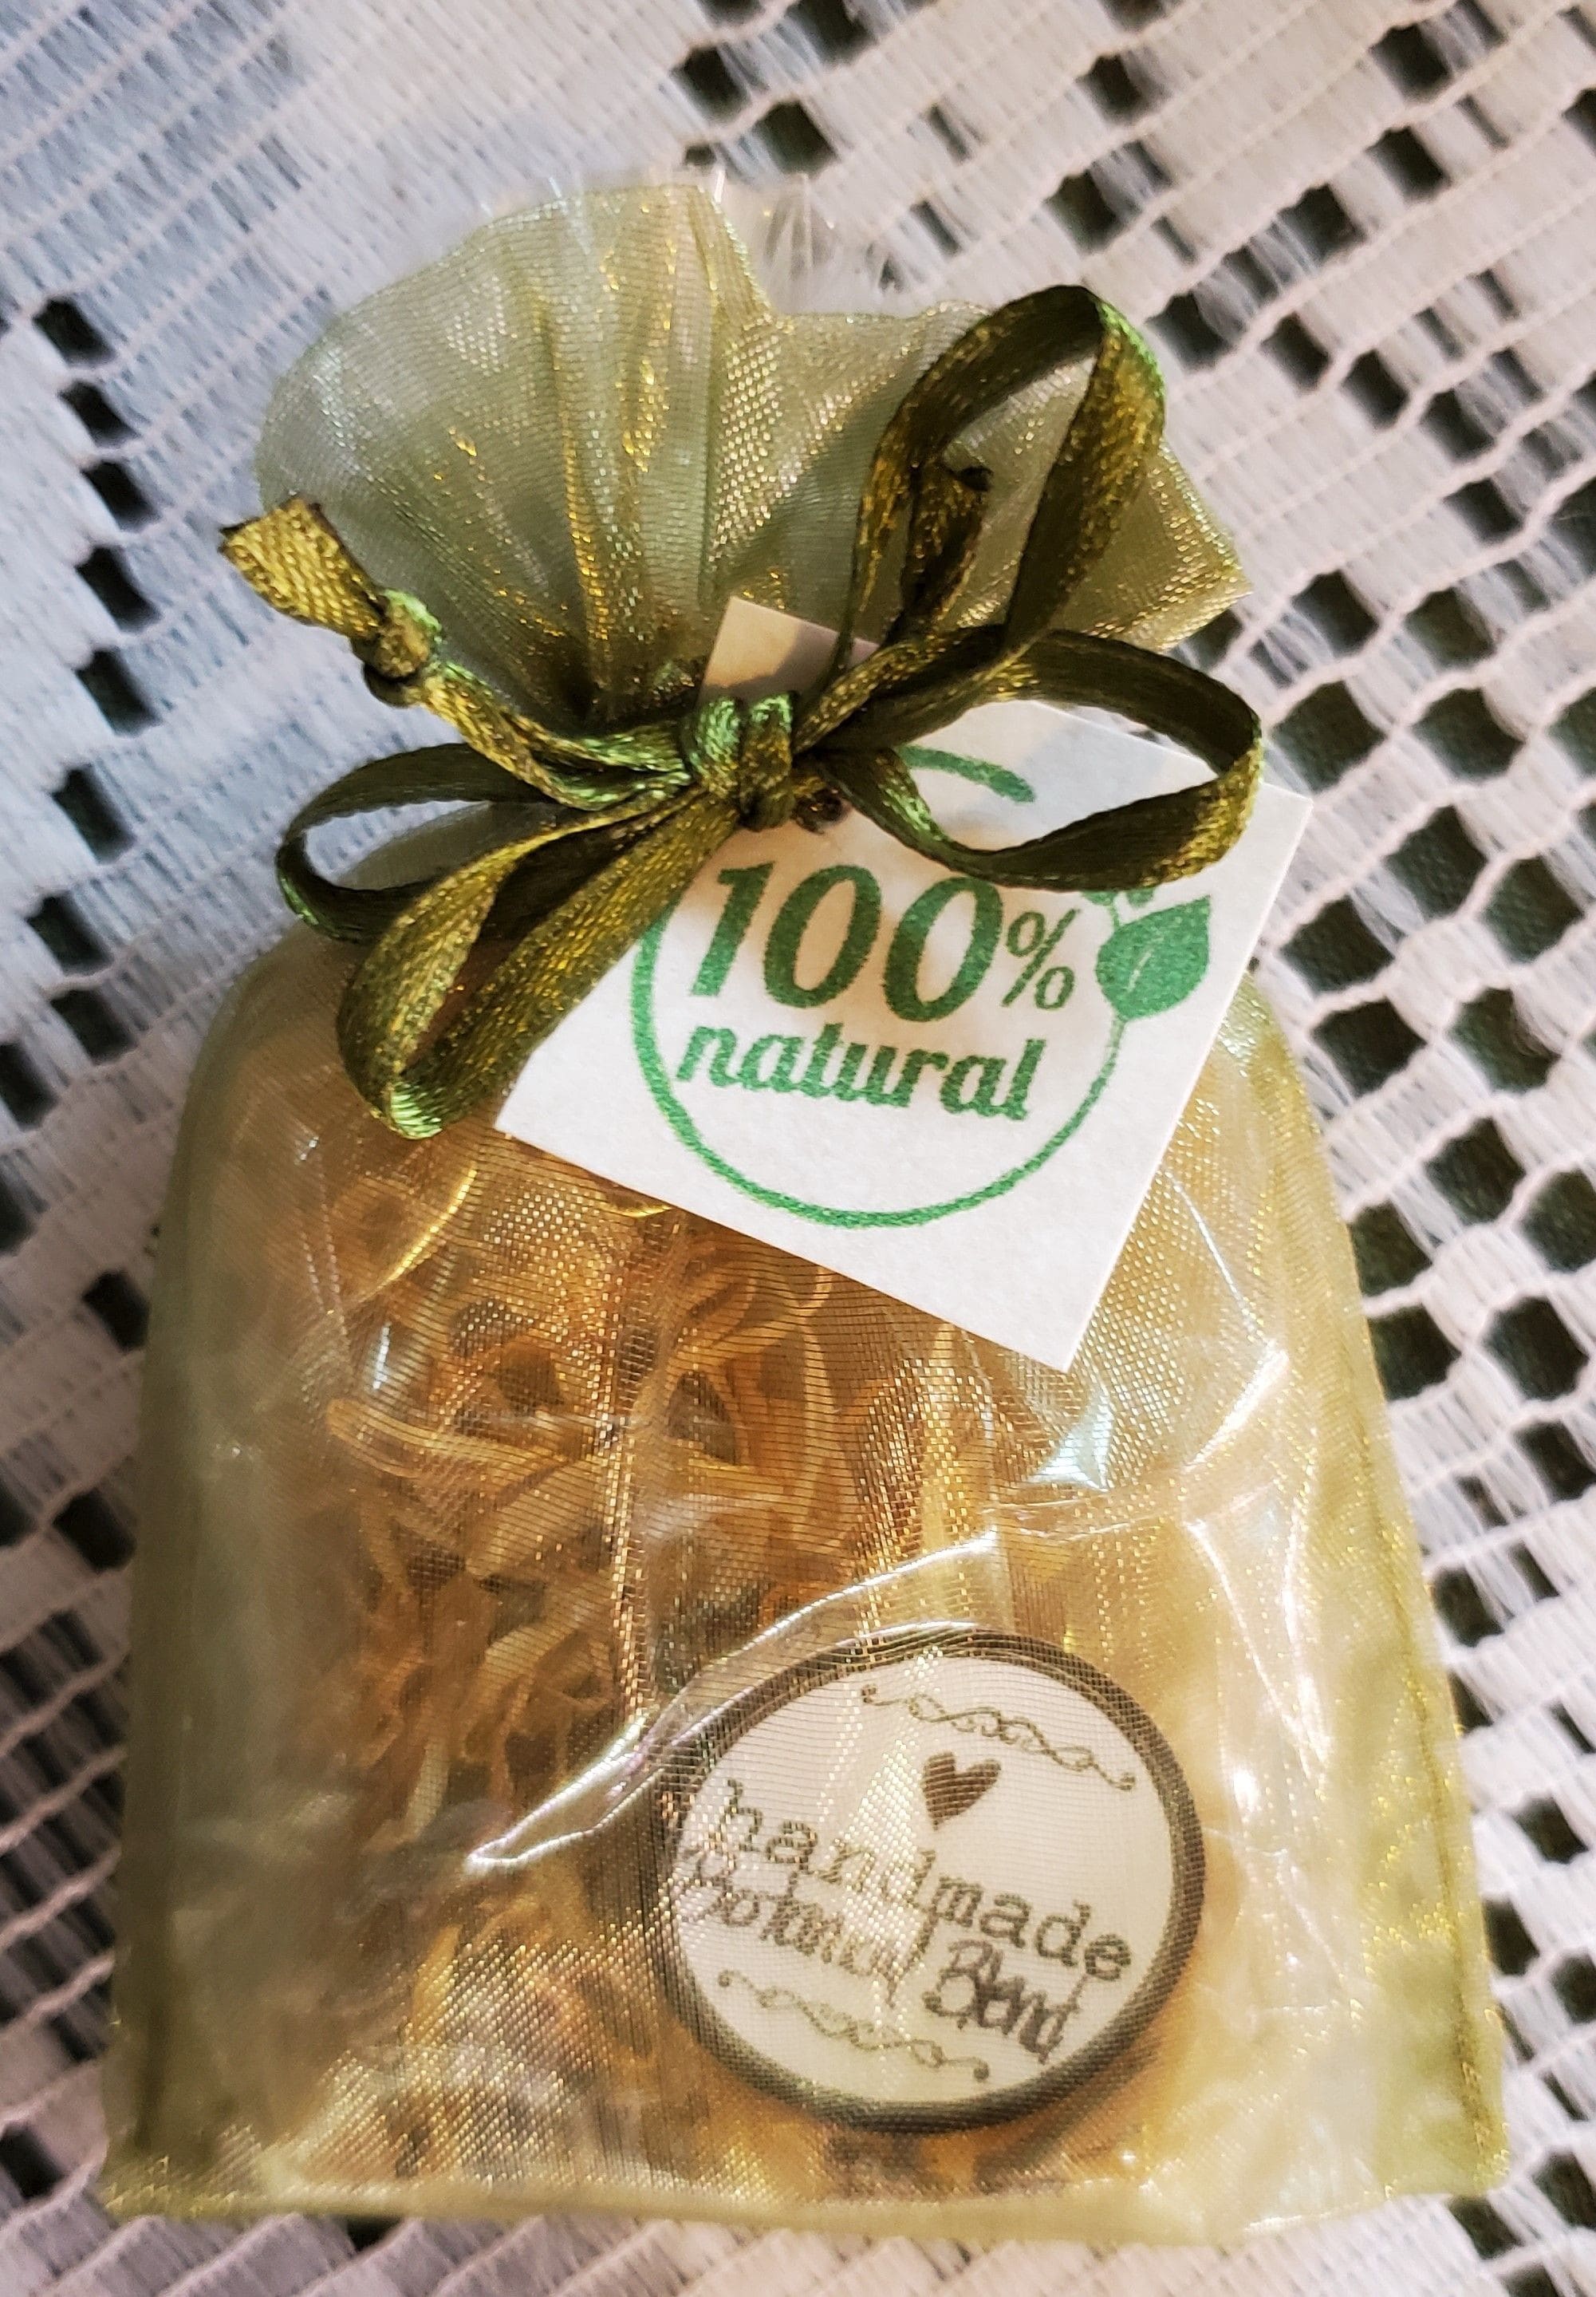 Our top quality soap gift favours are hand made in Manitoba in small batches with no dyes, preservatives or chemical scents.  Vegan varieties. Love Local!